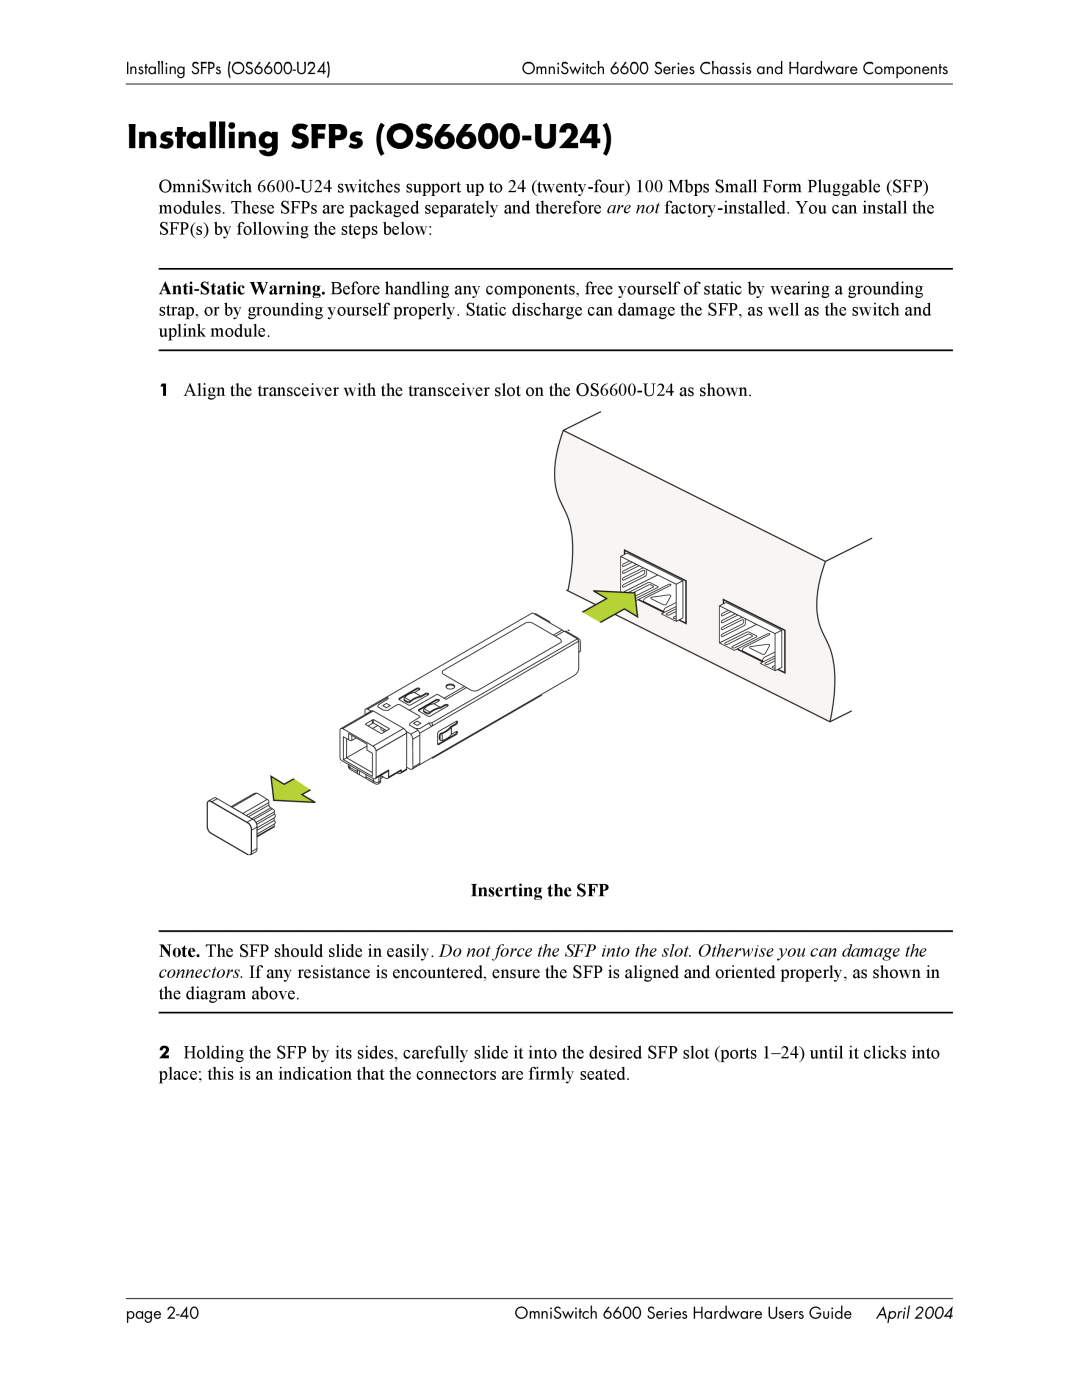 Alcatel-Lucent 6648, 6624, 6600 Series manual Installing SFPs OS6600-U24, Inserting the SFP 